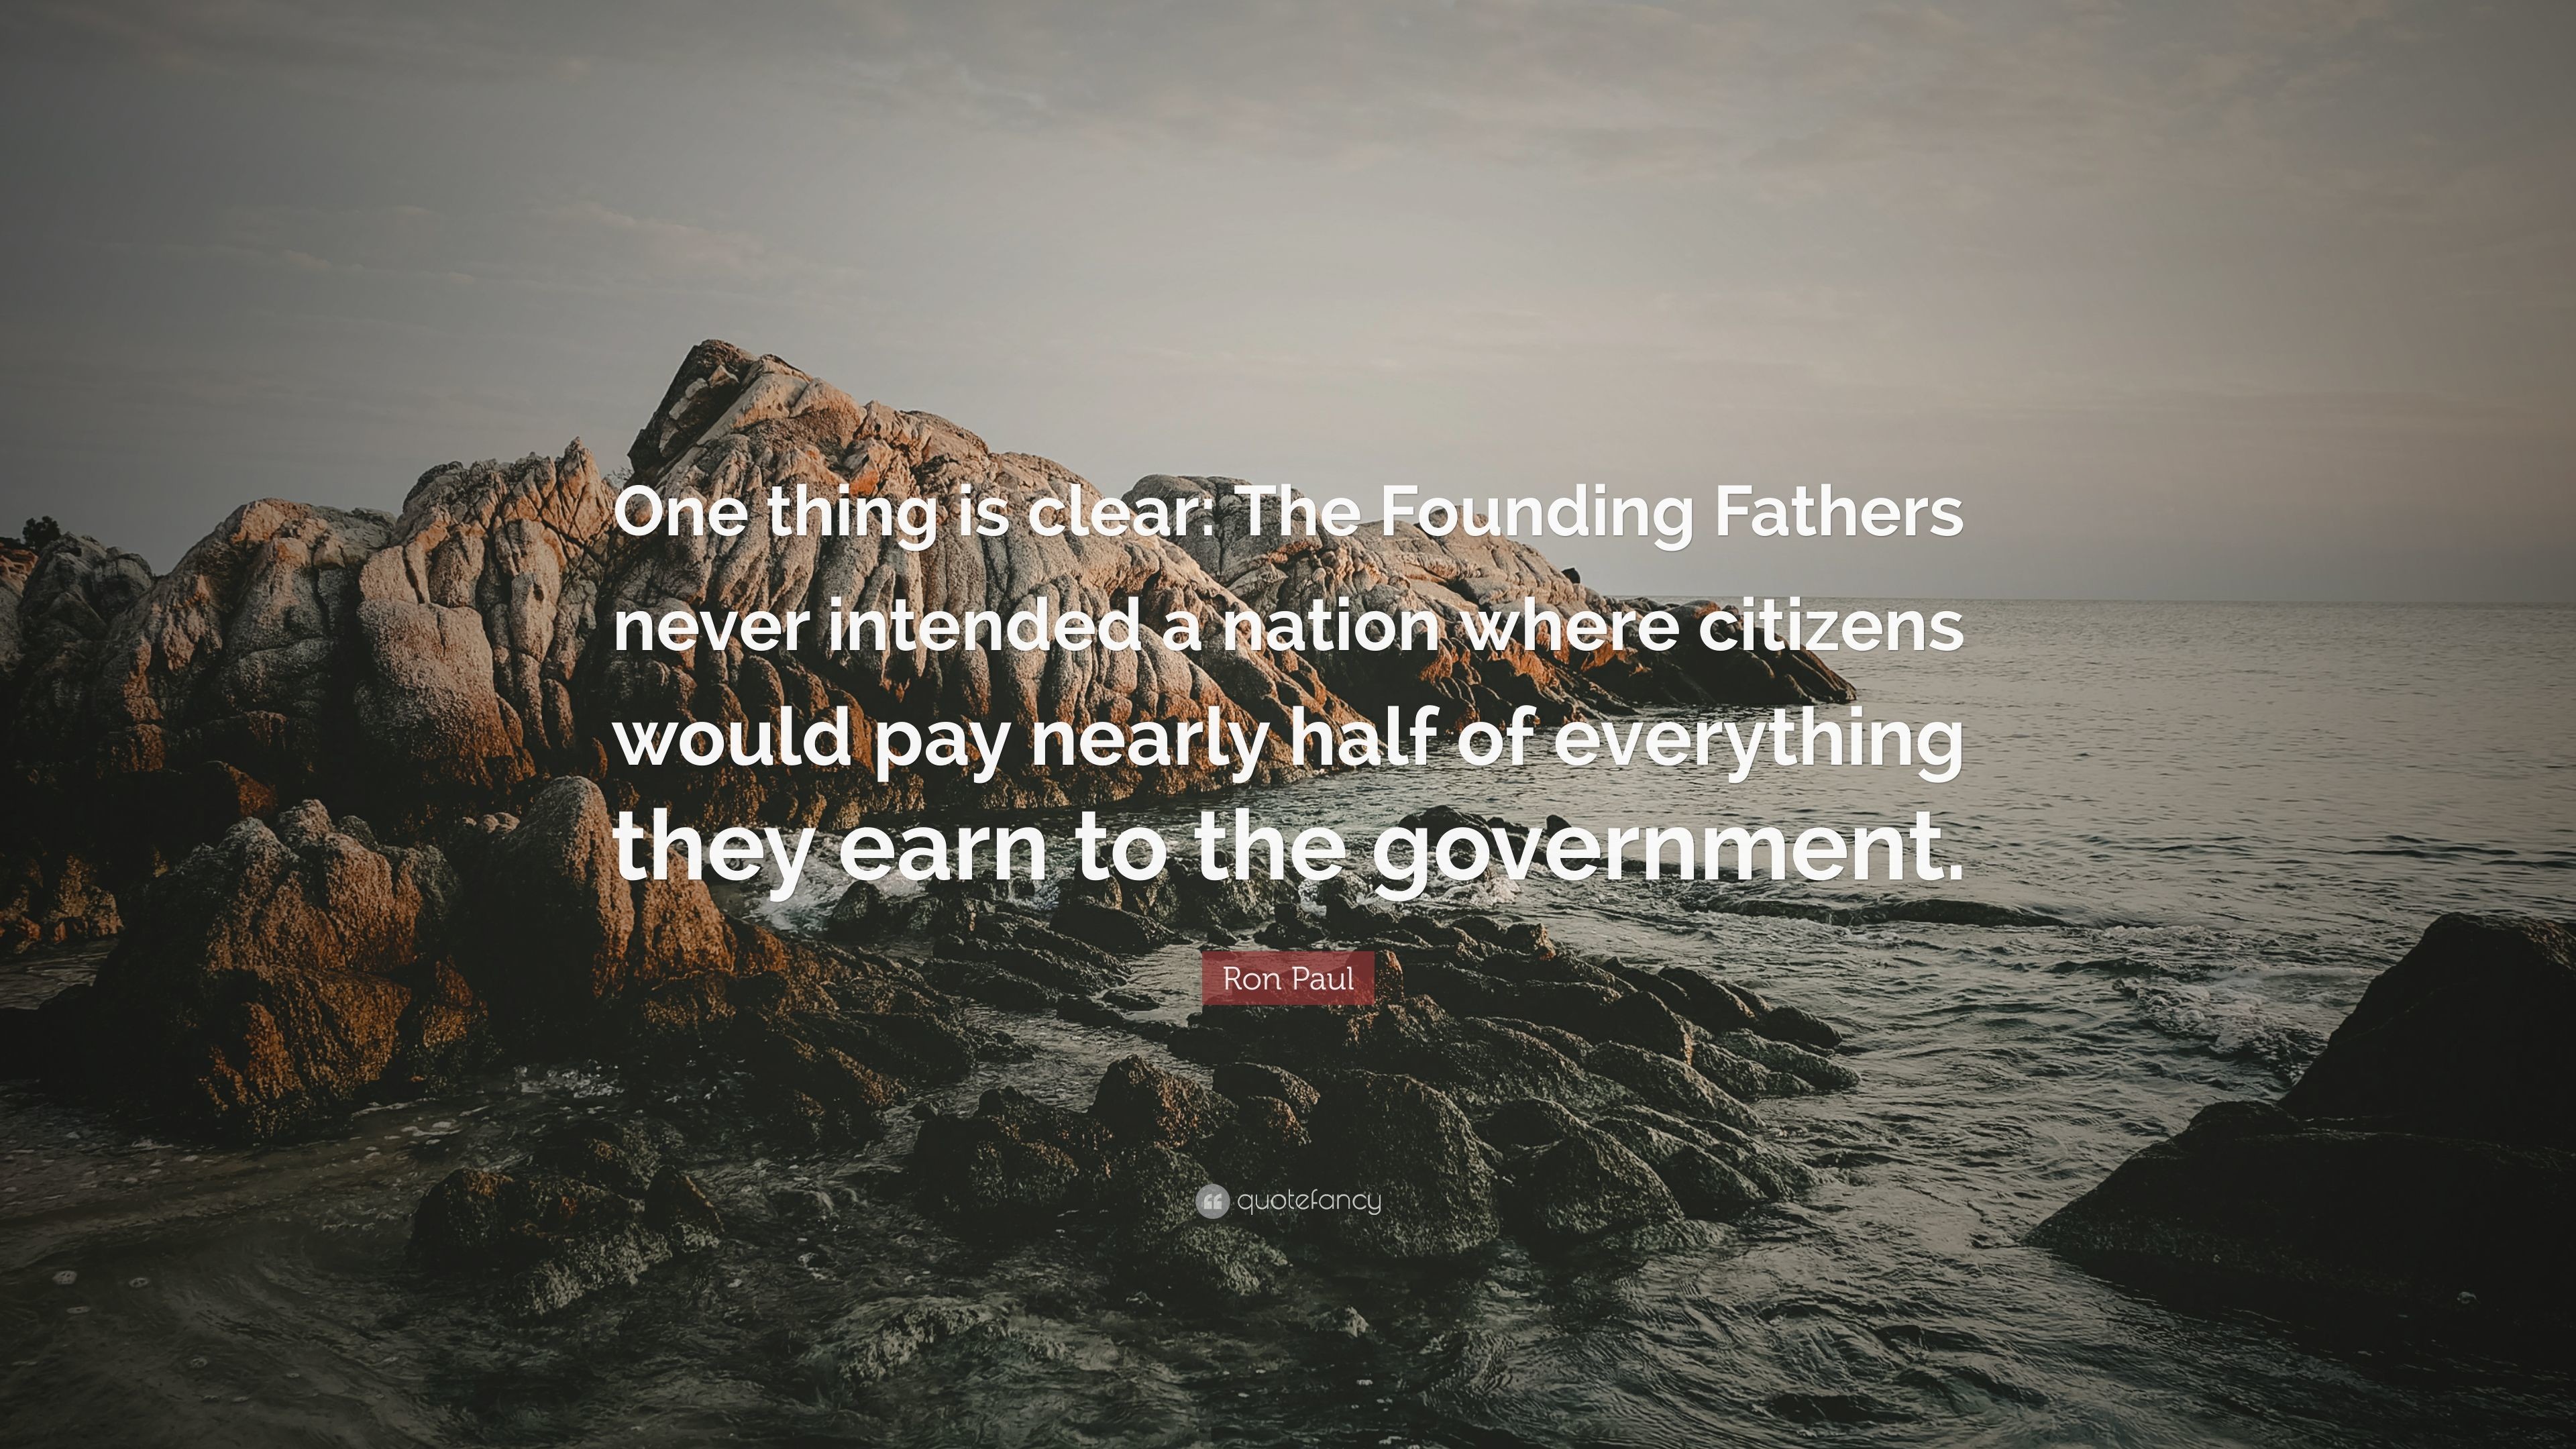 3840x2160 Ron Paul Quote: “One thing is clear: The Founding Fathers never intended a